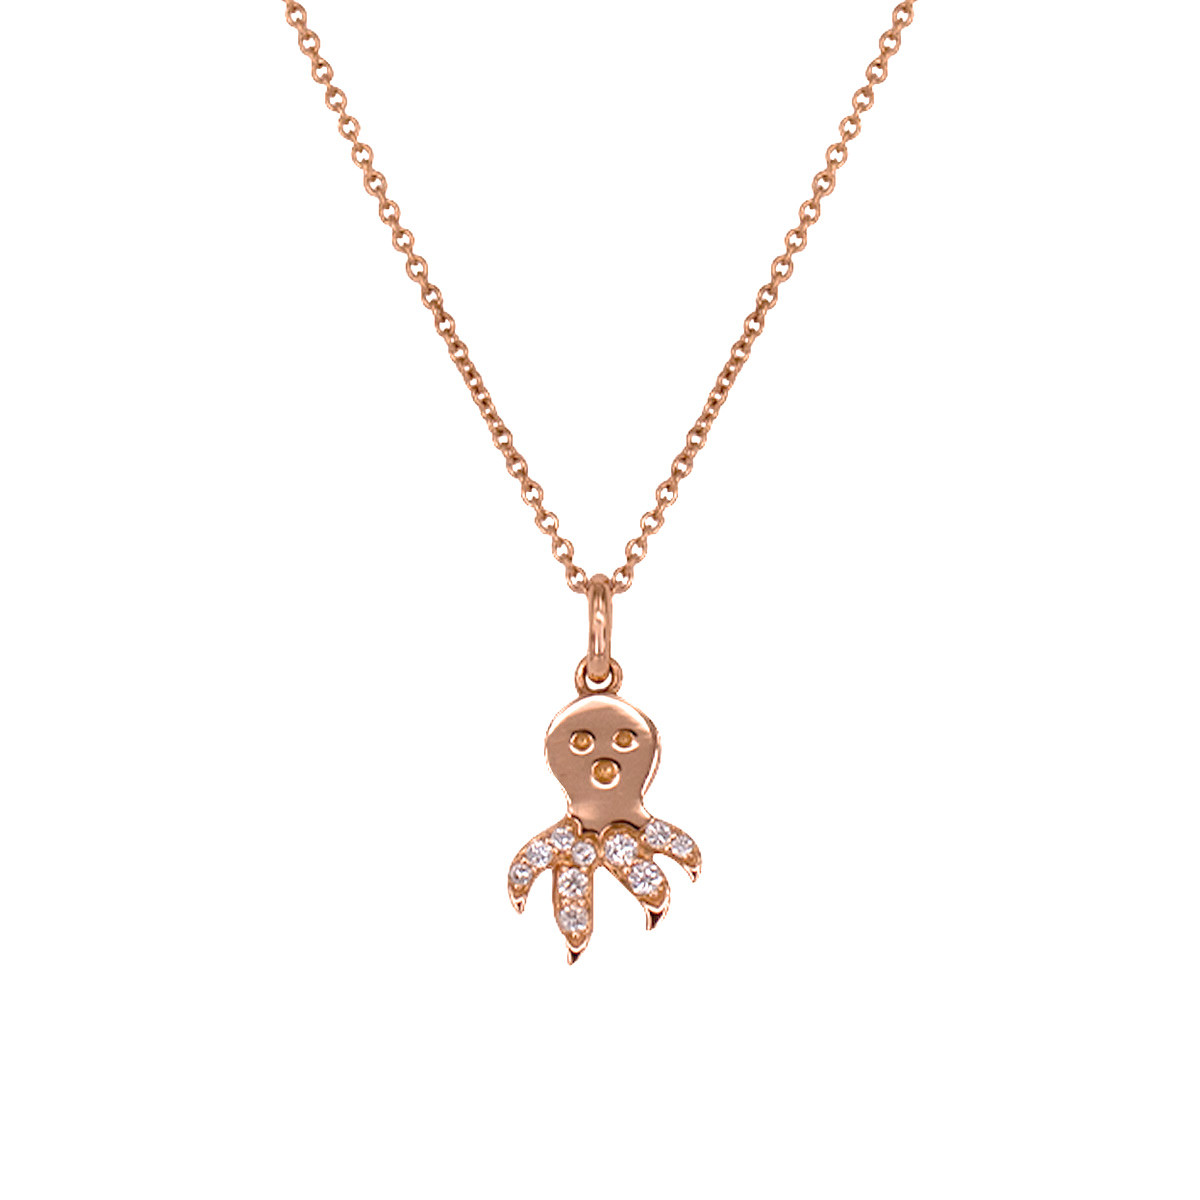 PENDANT WITH ROSE GOLD AND SHINY  OCTOPUS